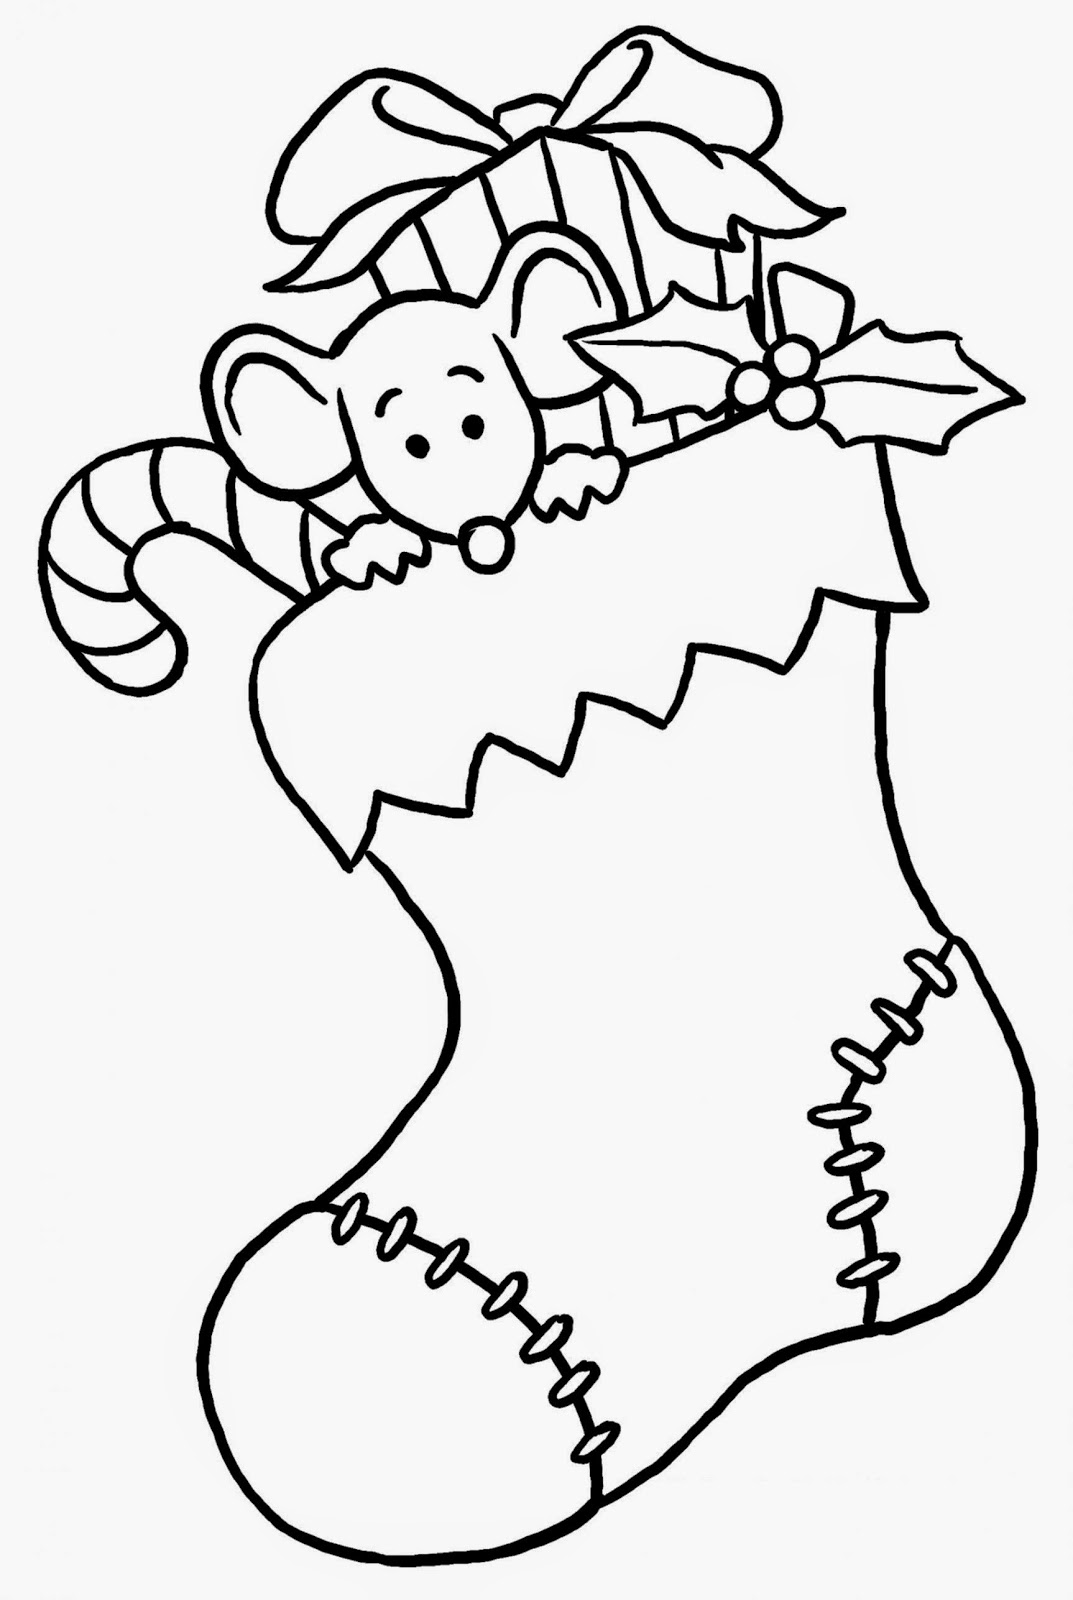 Free Printable Preschool Coloring Pages Best Coloring Pages